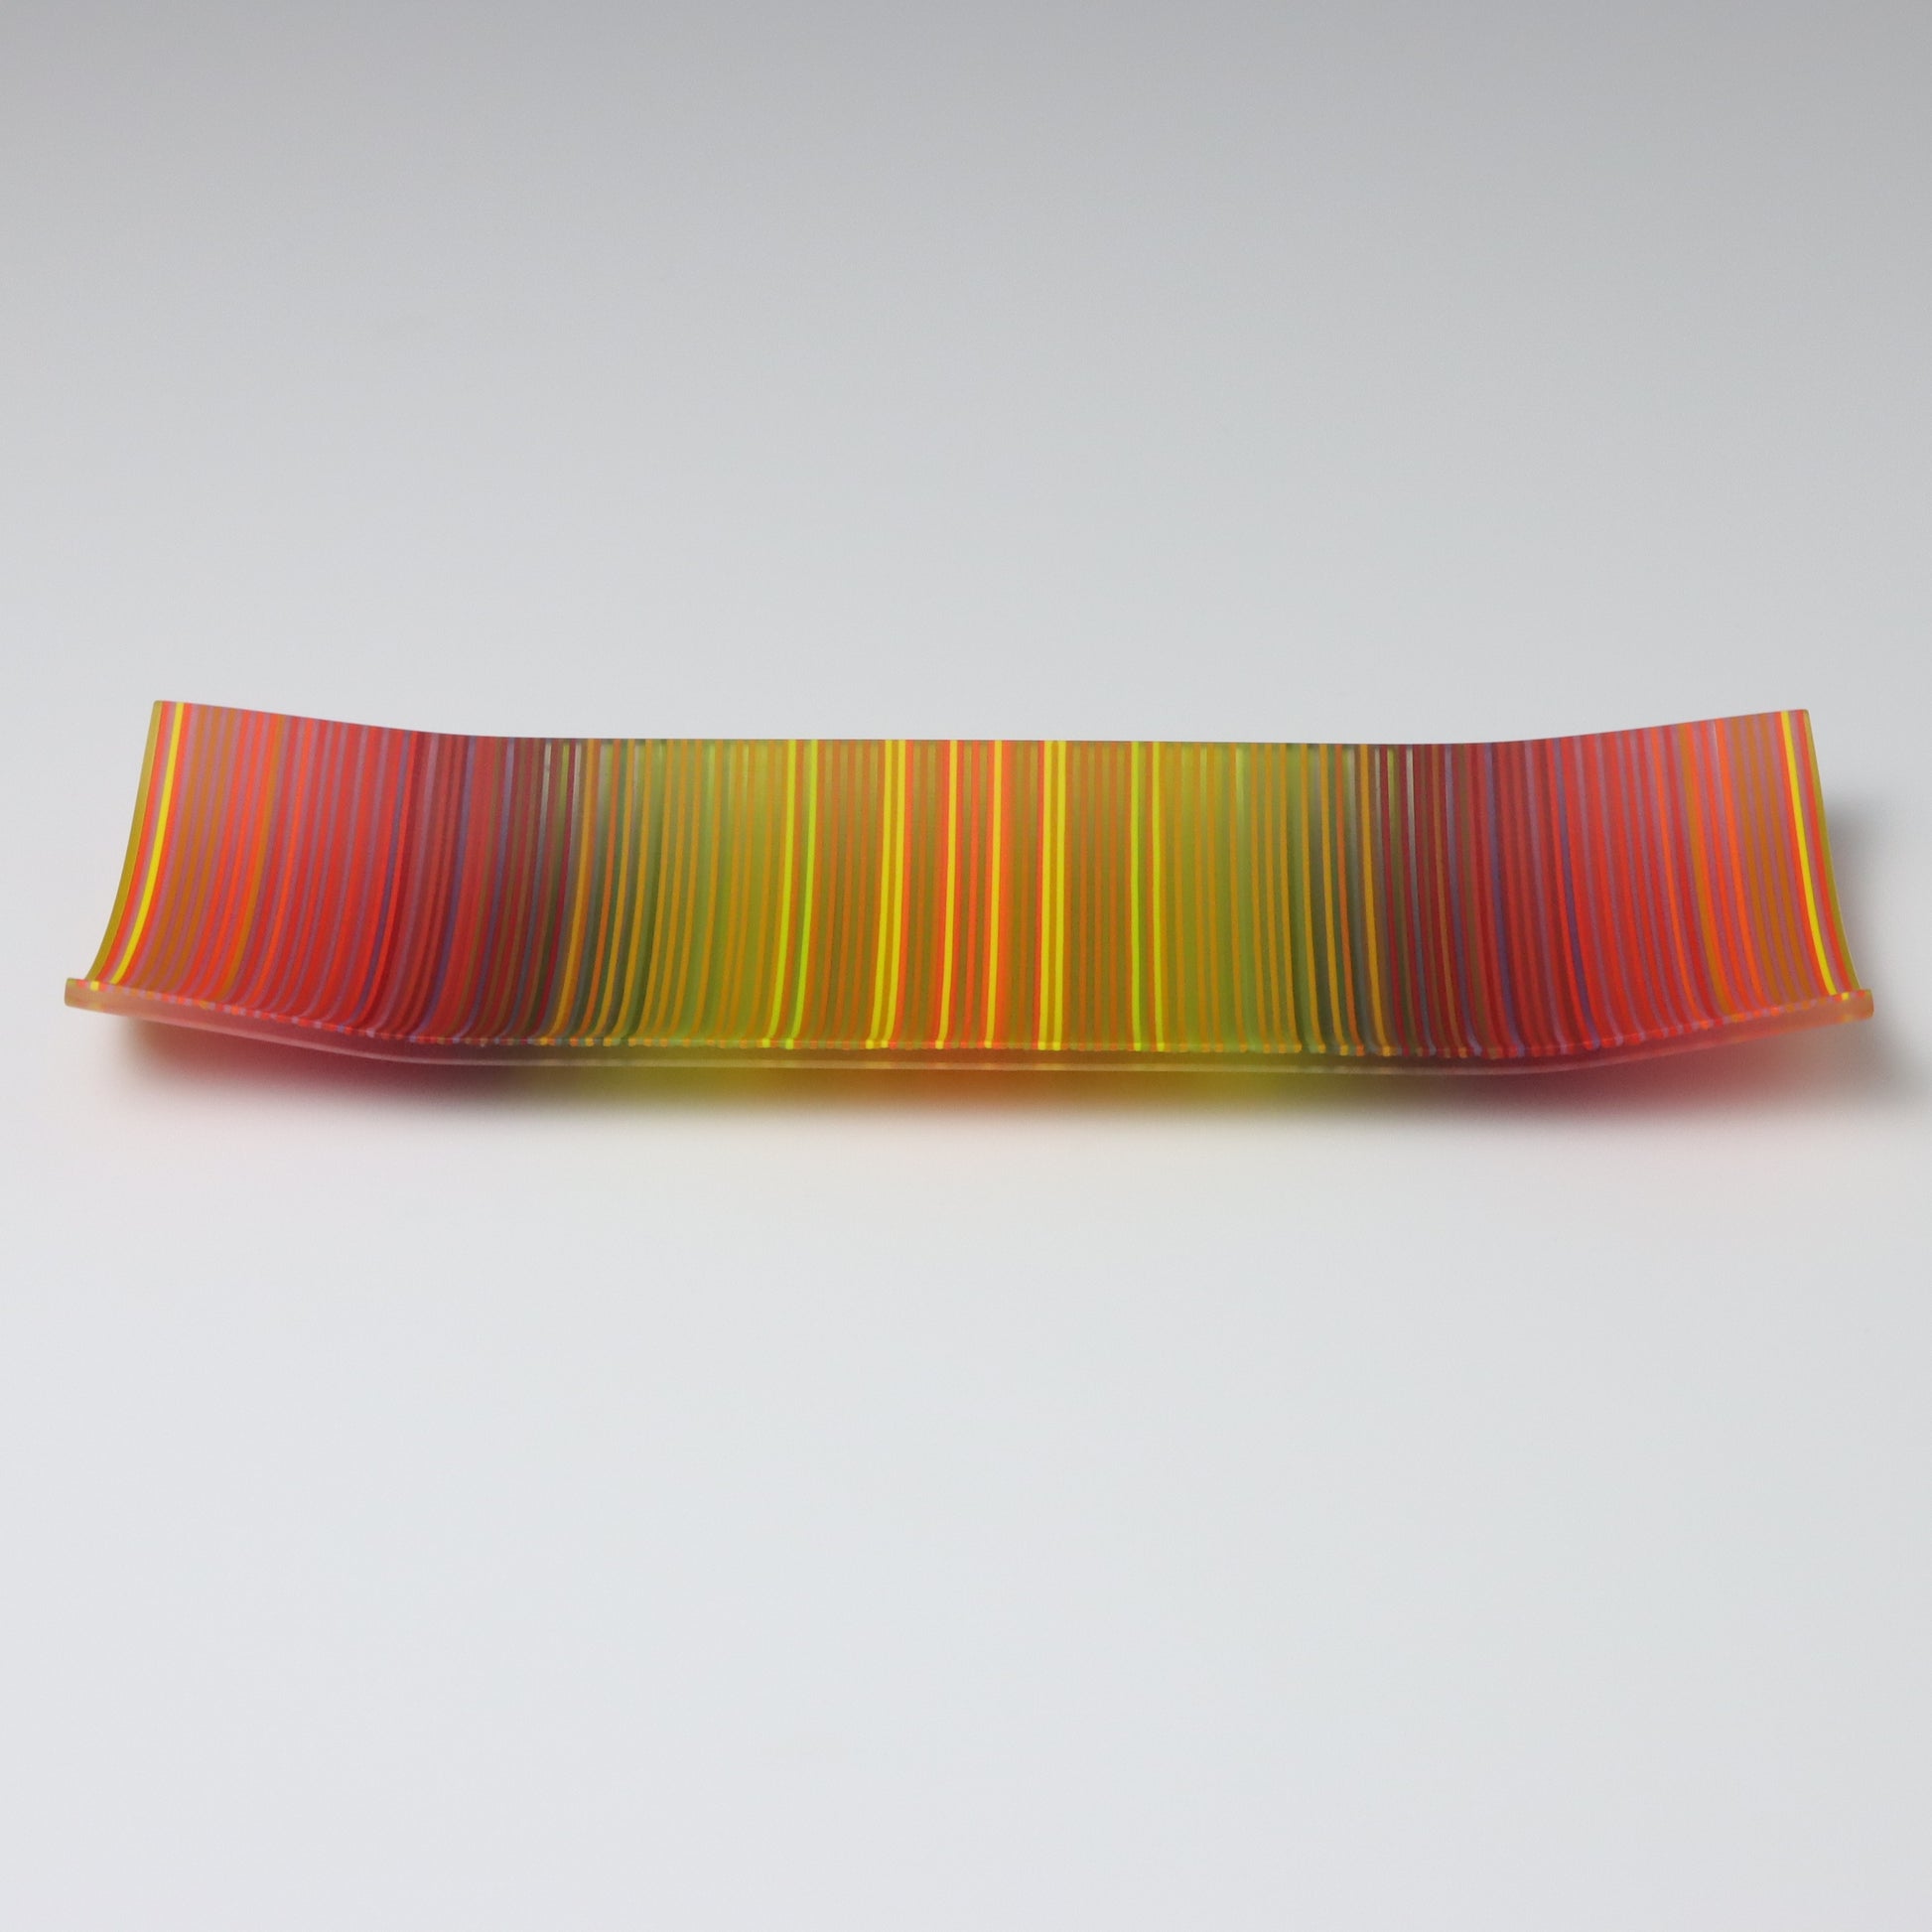 An enchanting ColourWave Glass fused glass plate, where the corners rise softly, framing a rich mosaic of autumn colours. Stripes of deep red, purple, green, and yellow, with a myriad of additional shades revealed upon close examination, create a visual celebration of autumn’s splendour.